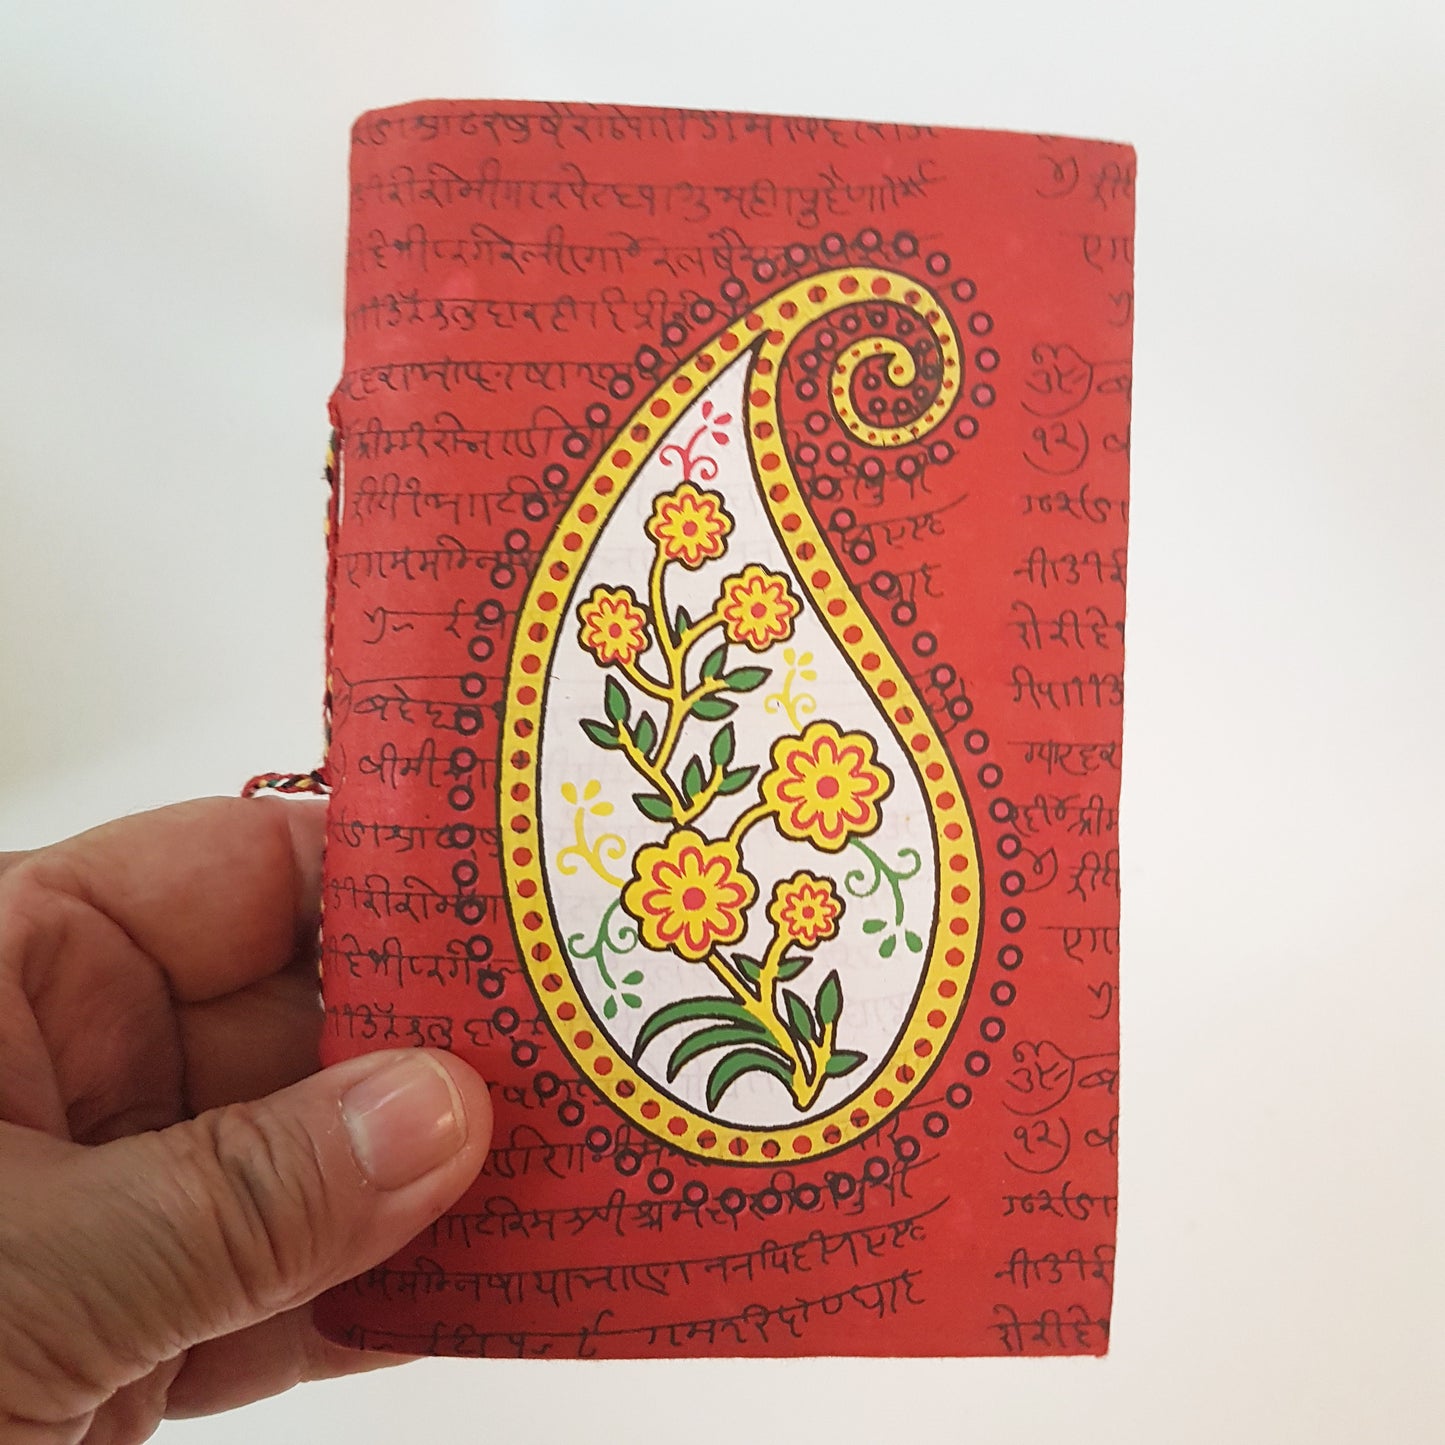 Paisley aesthetic journal for creative writing, drawing & art. 4x6 inch.